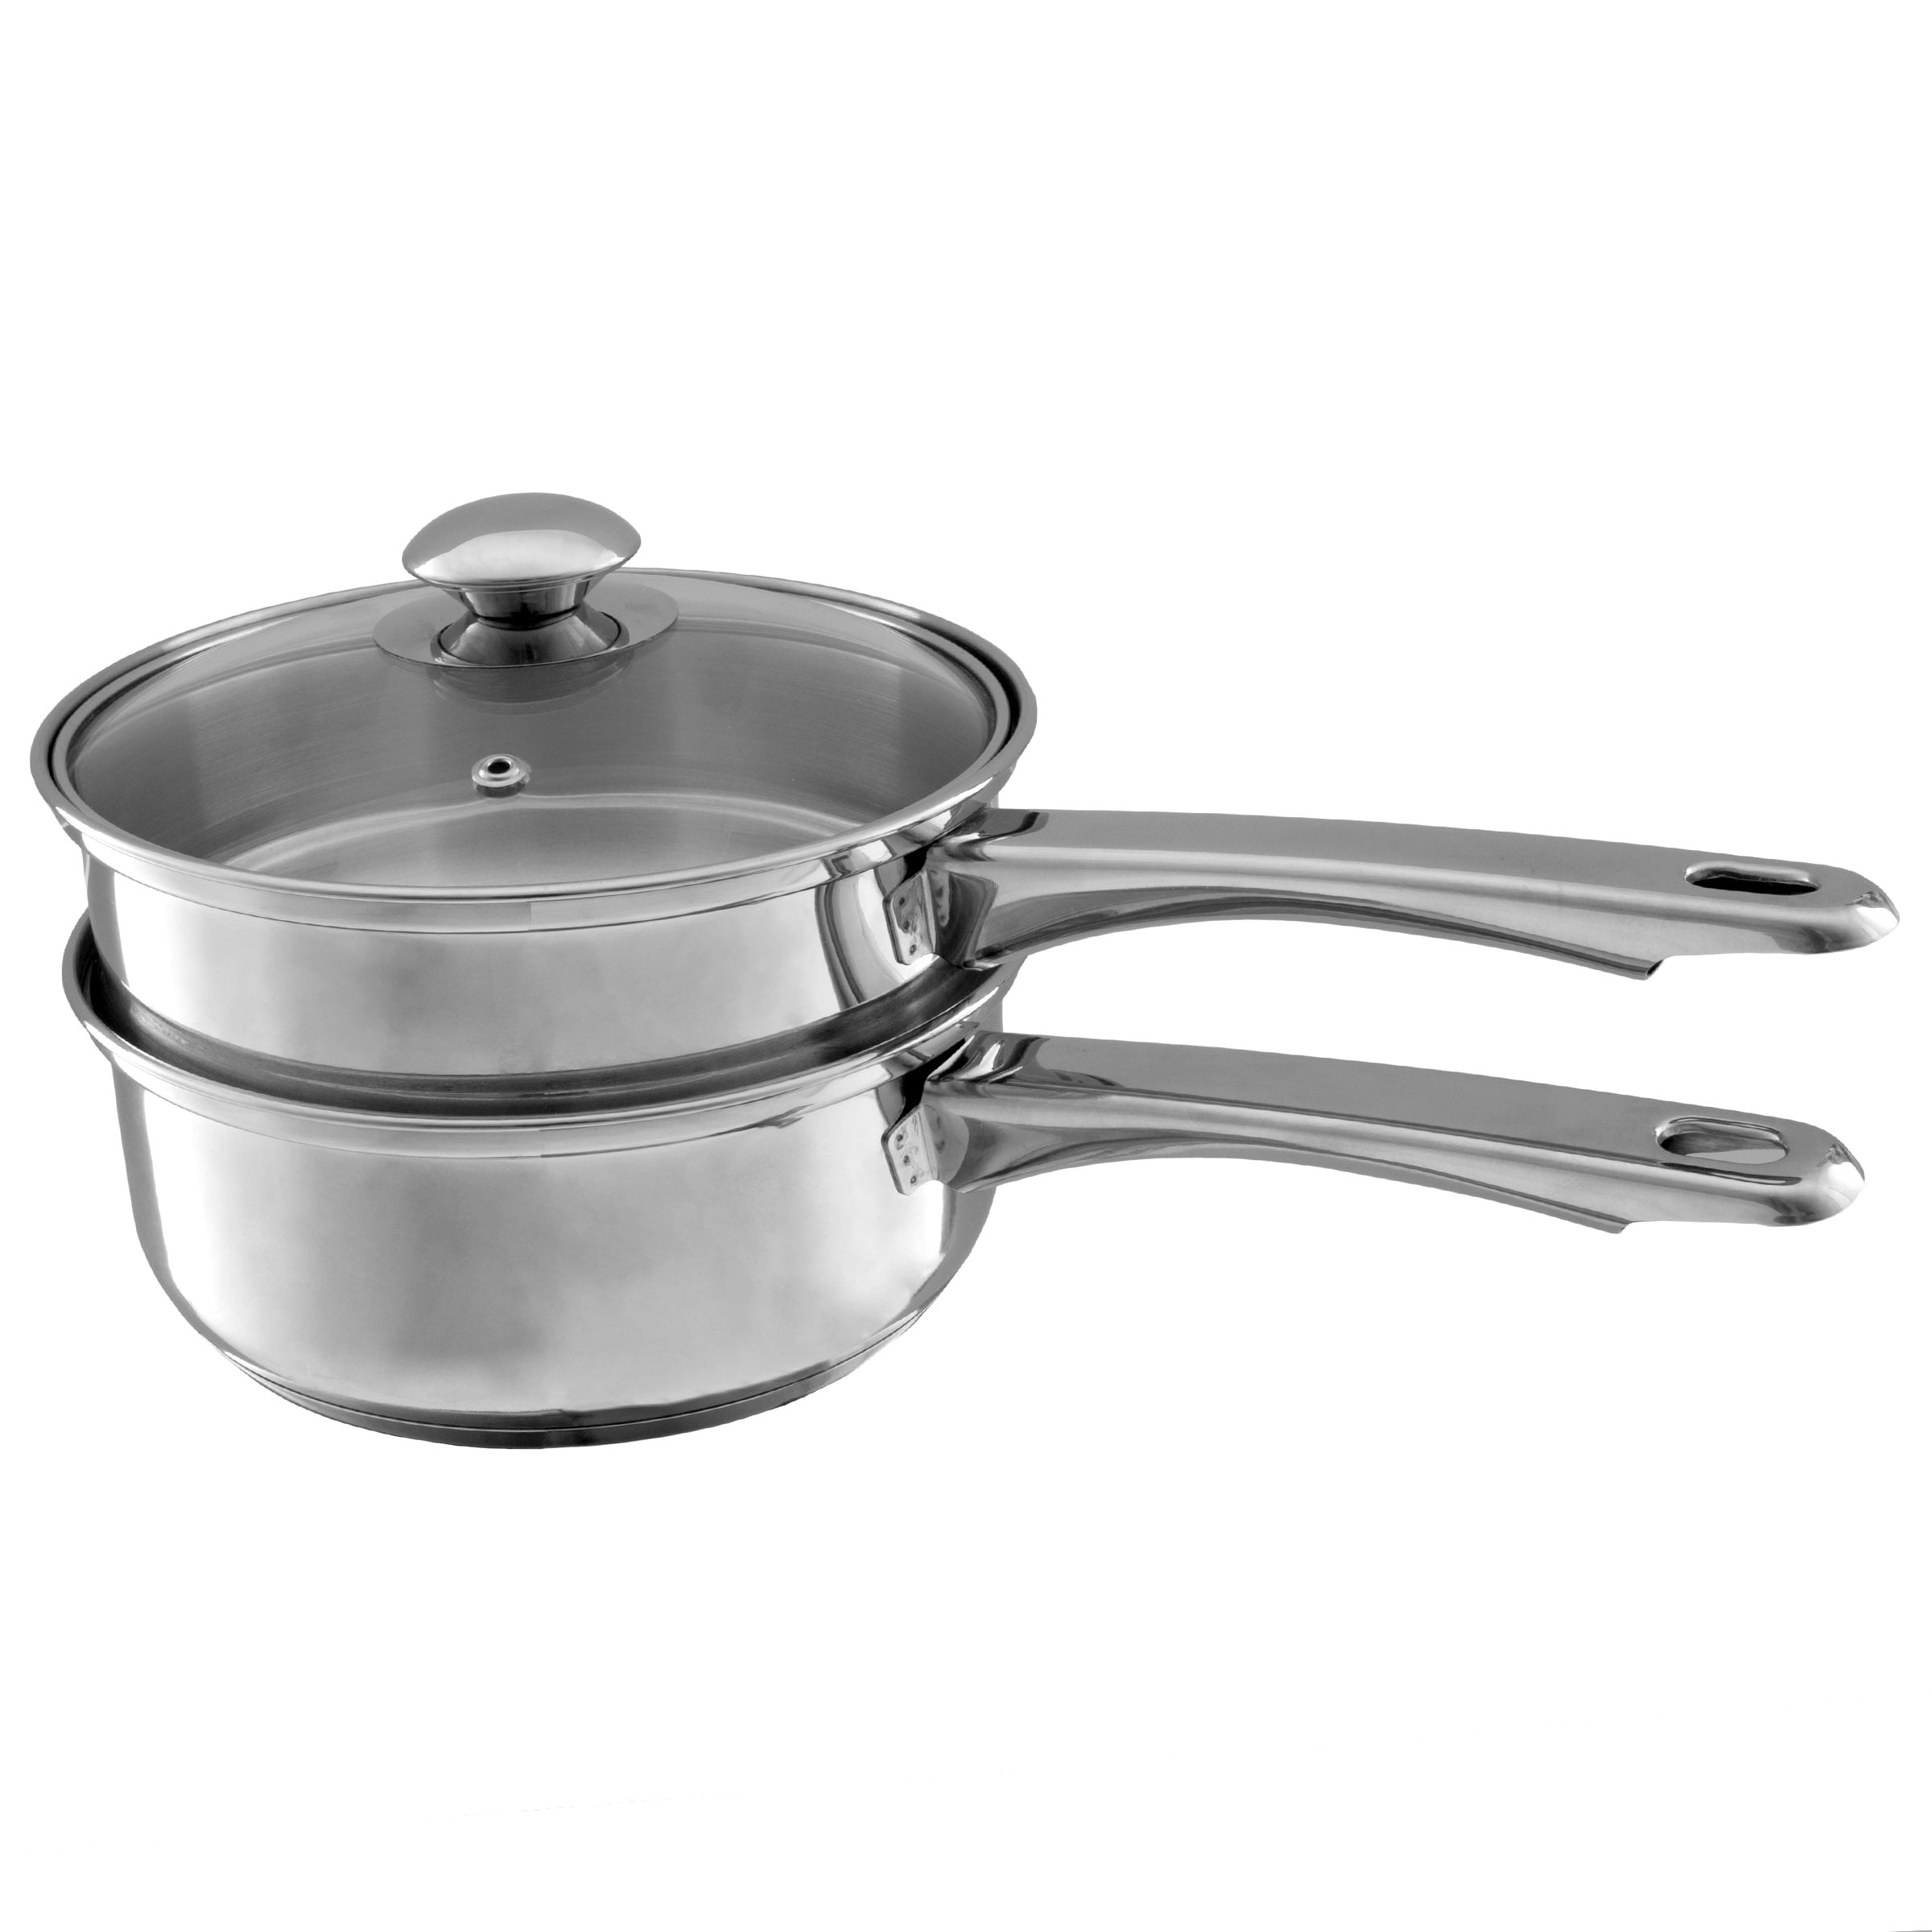 Mainstays Stainless Steel 3quart Sauce Pan With Straining Lid for sale online 